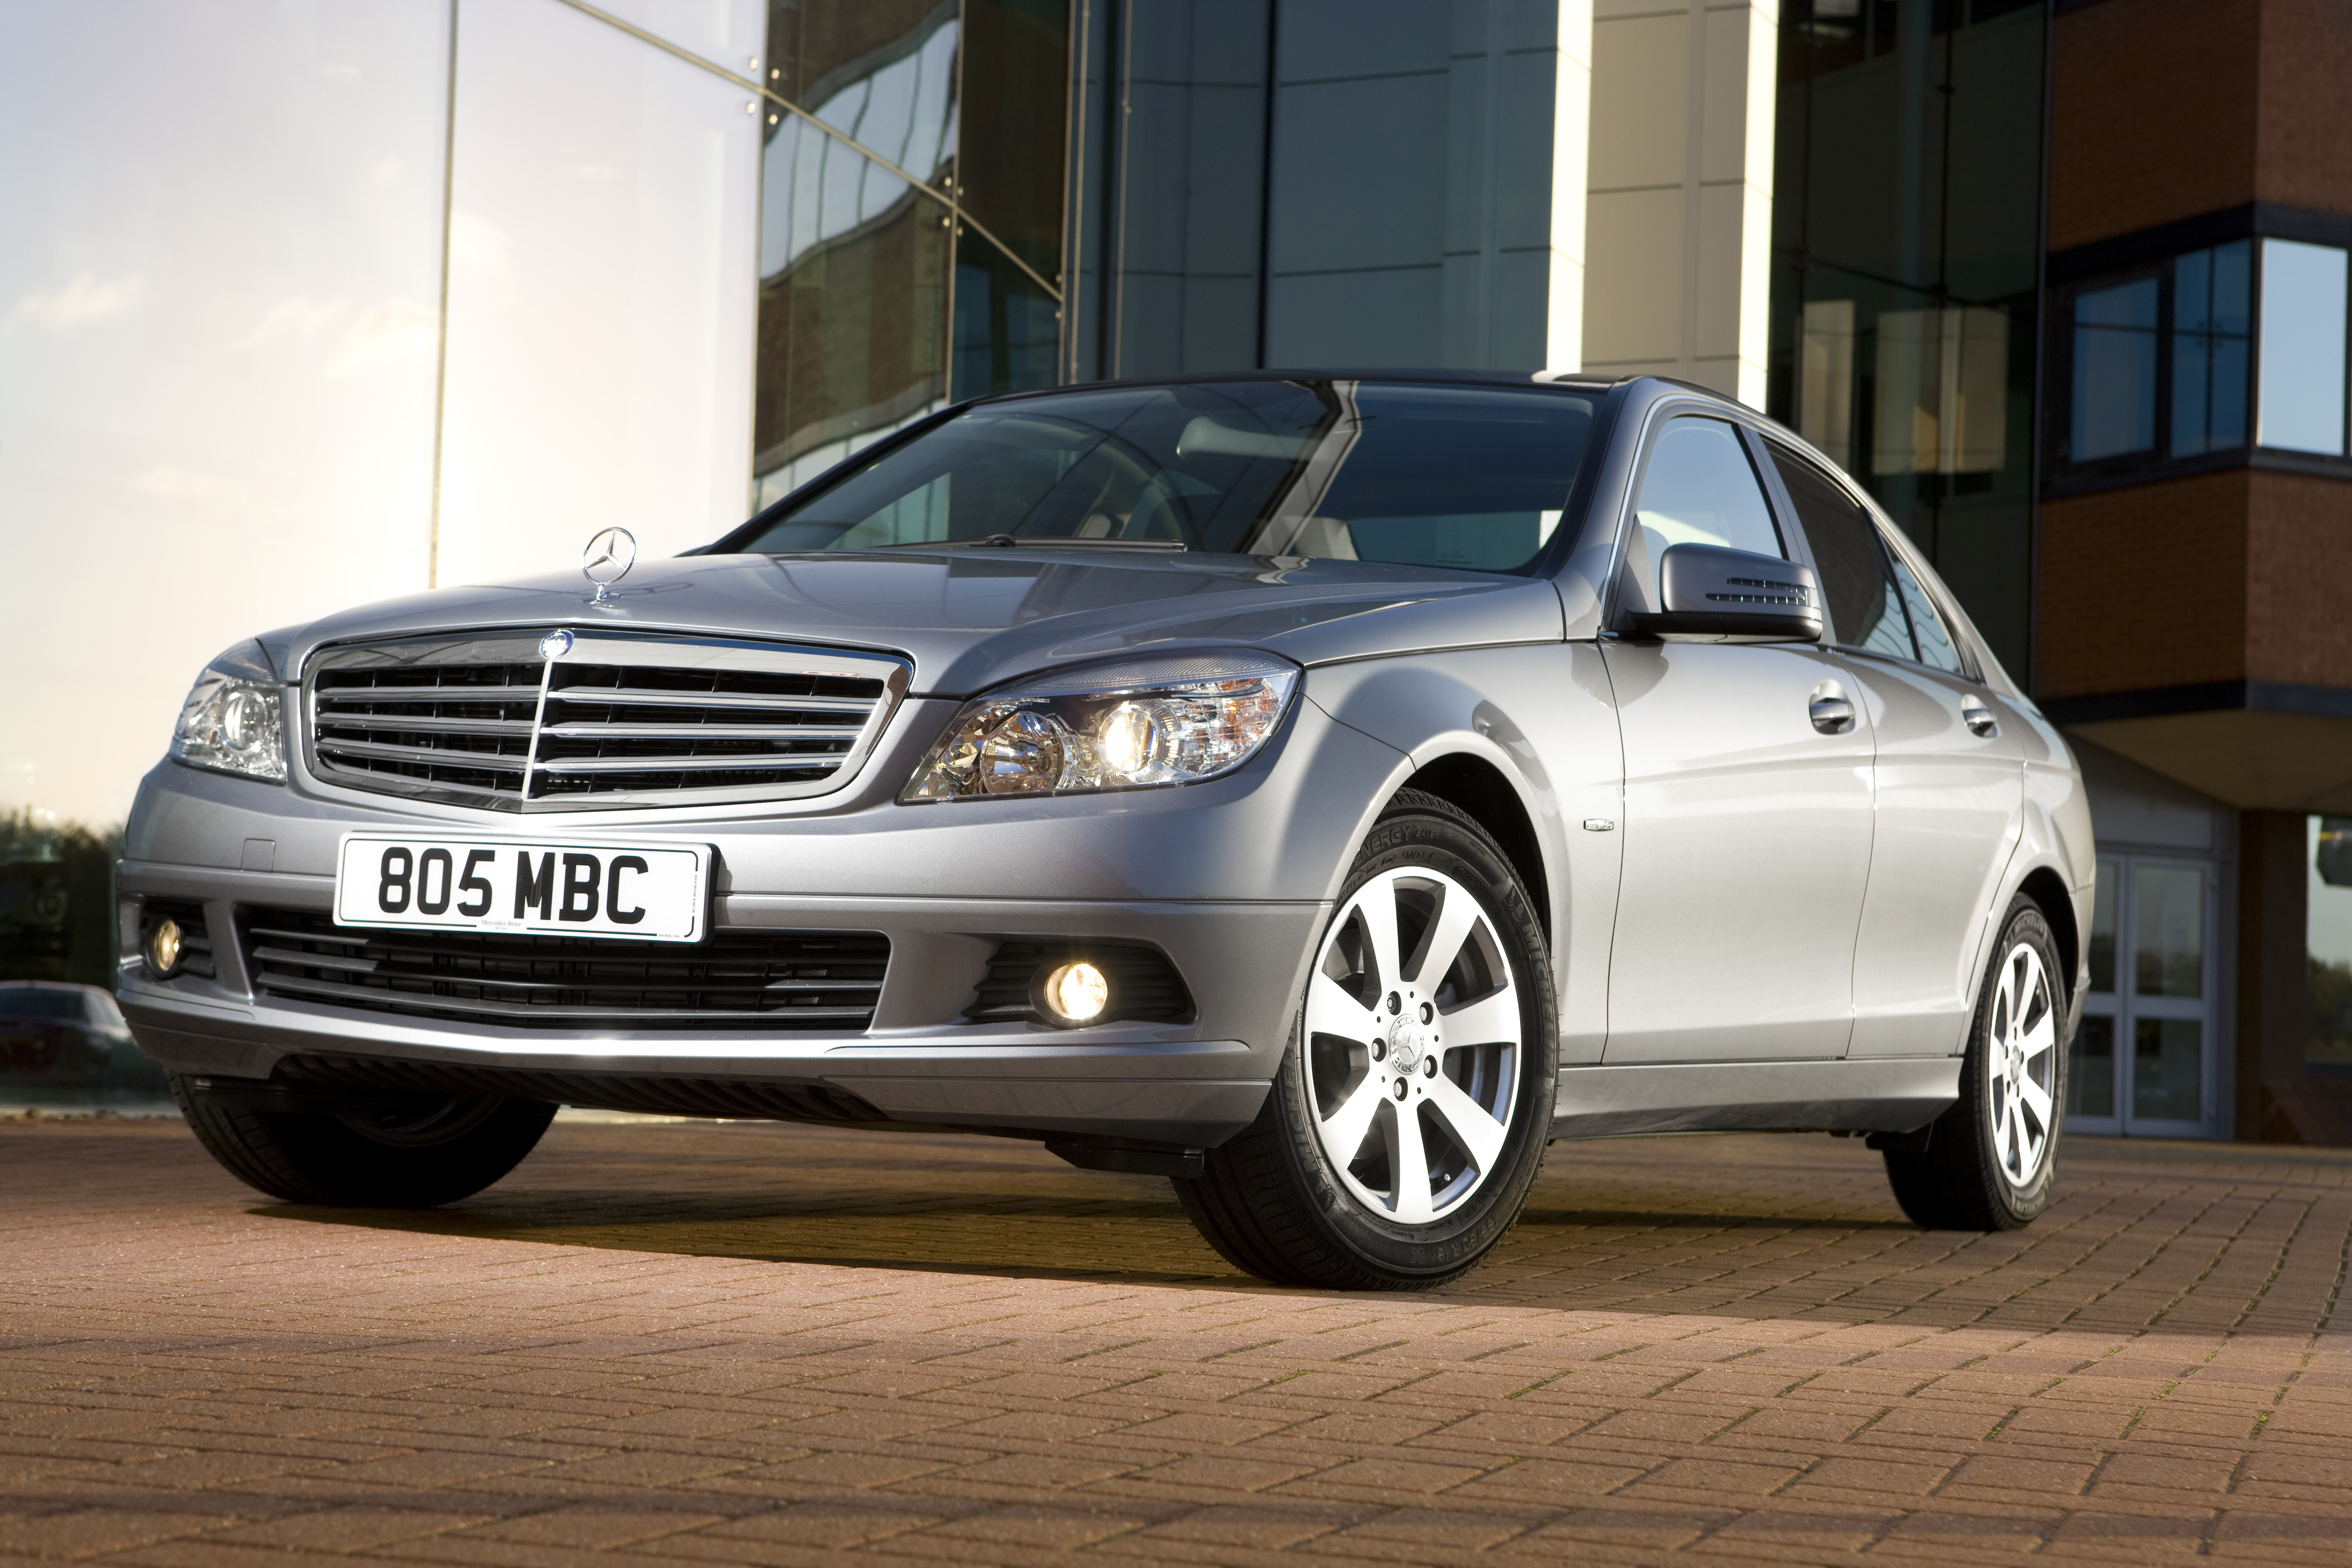 The history of the Mercedes-Benz C-Class